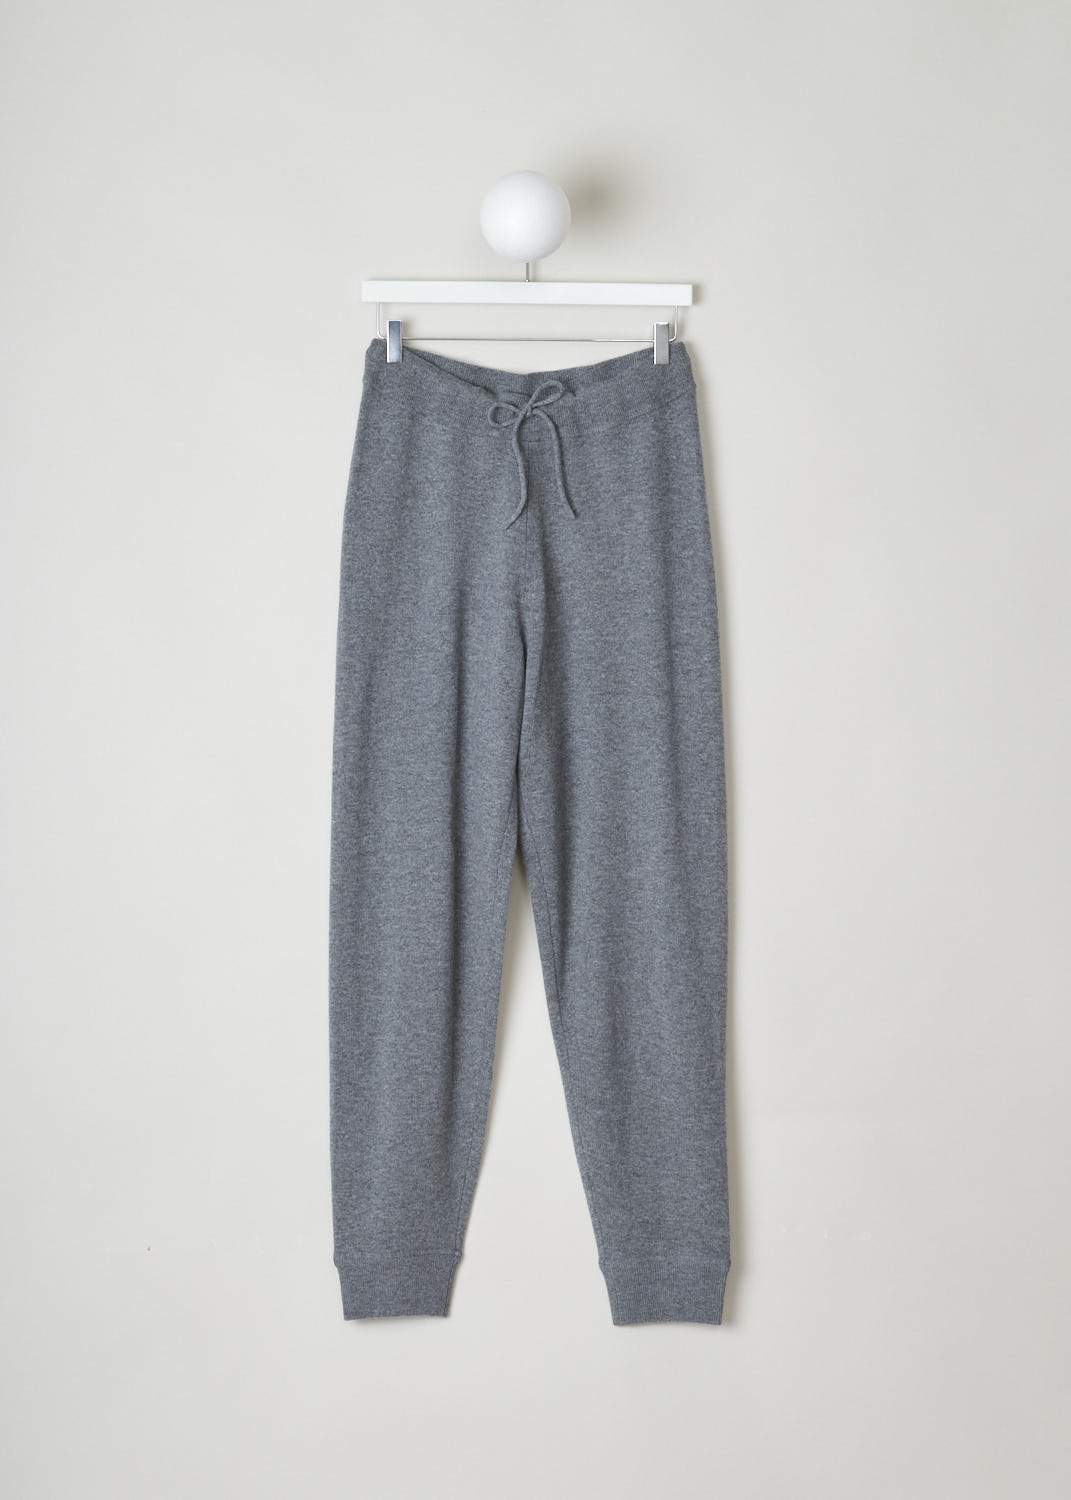 CLOSED, GREY KNITTED PANTS WITH DRAWSTRING, KNITTED_PANTS_C91007_92B_22_164, Grey, Front, Beautiful wool knitted pants. The pants have a ribbed elastic waistband, as well as a drawstring. That same ribbed detailing can be found on the pant cuffs. 
